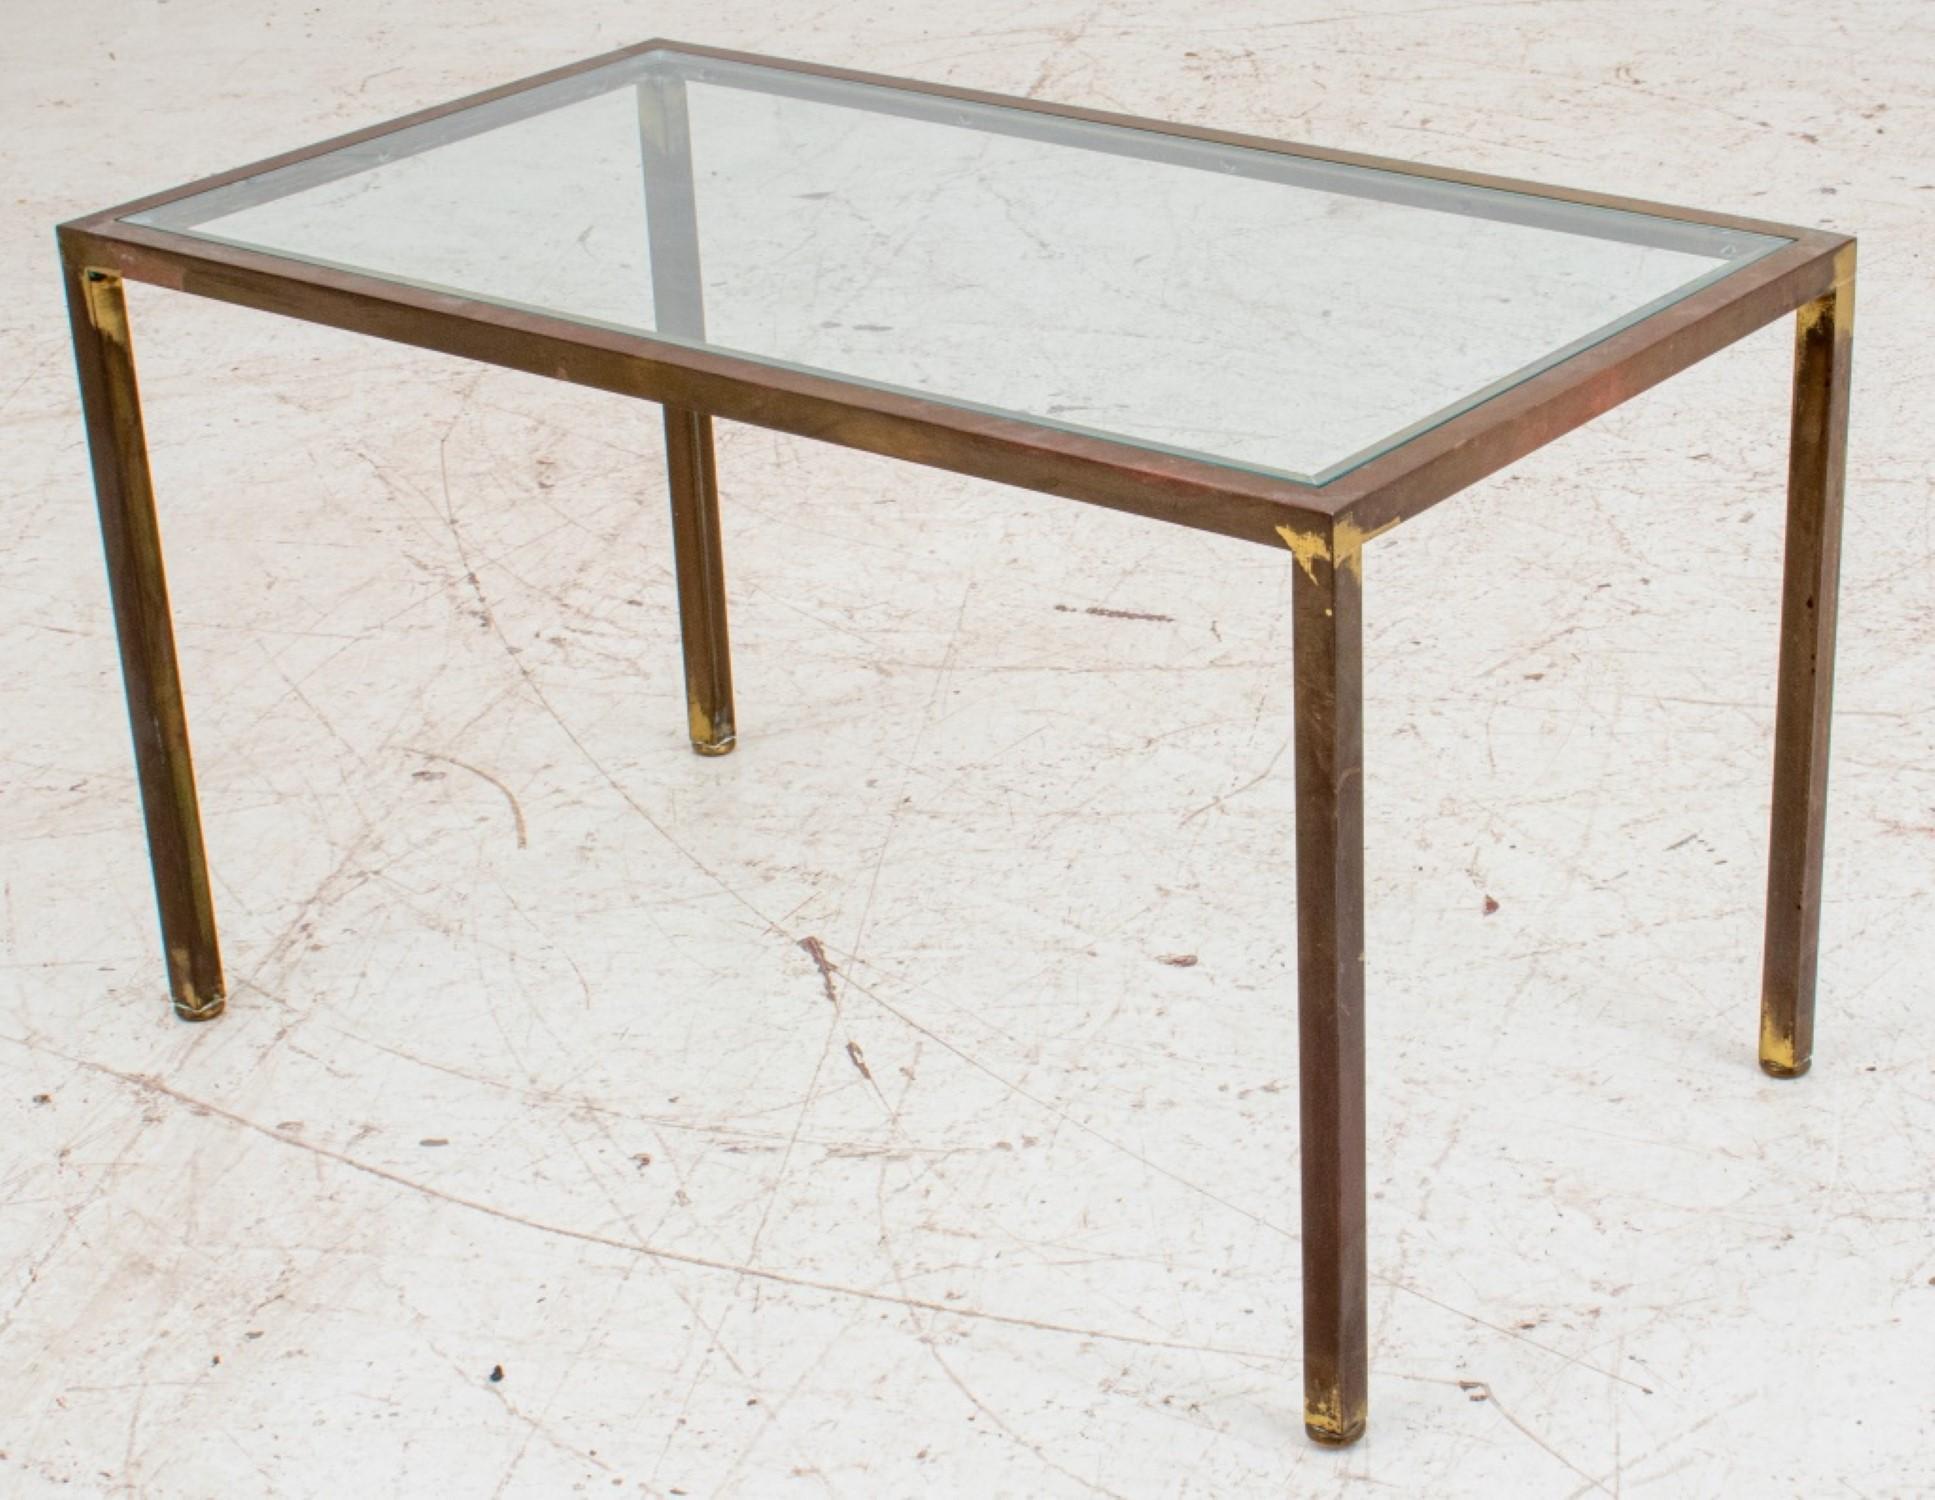 
Post-Modern Gilt Metal Coffee Table
Based on the description, this piece appears to be a post-modern coffee table with the following characteristics:

Style: Post-modern
Material:
* Base: Gilt metal - Likely metal covered in a thin layer of gold,